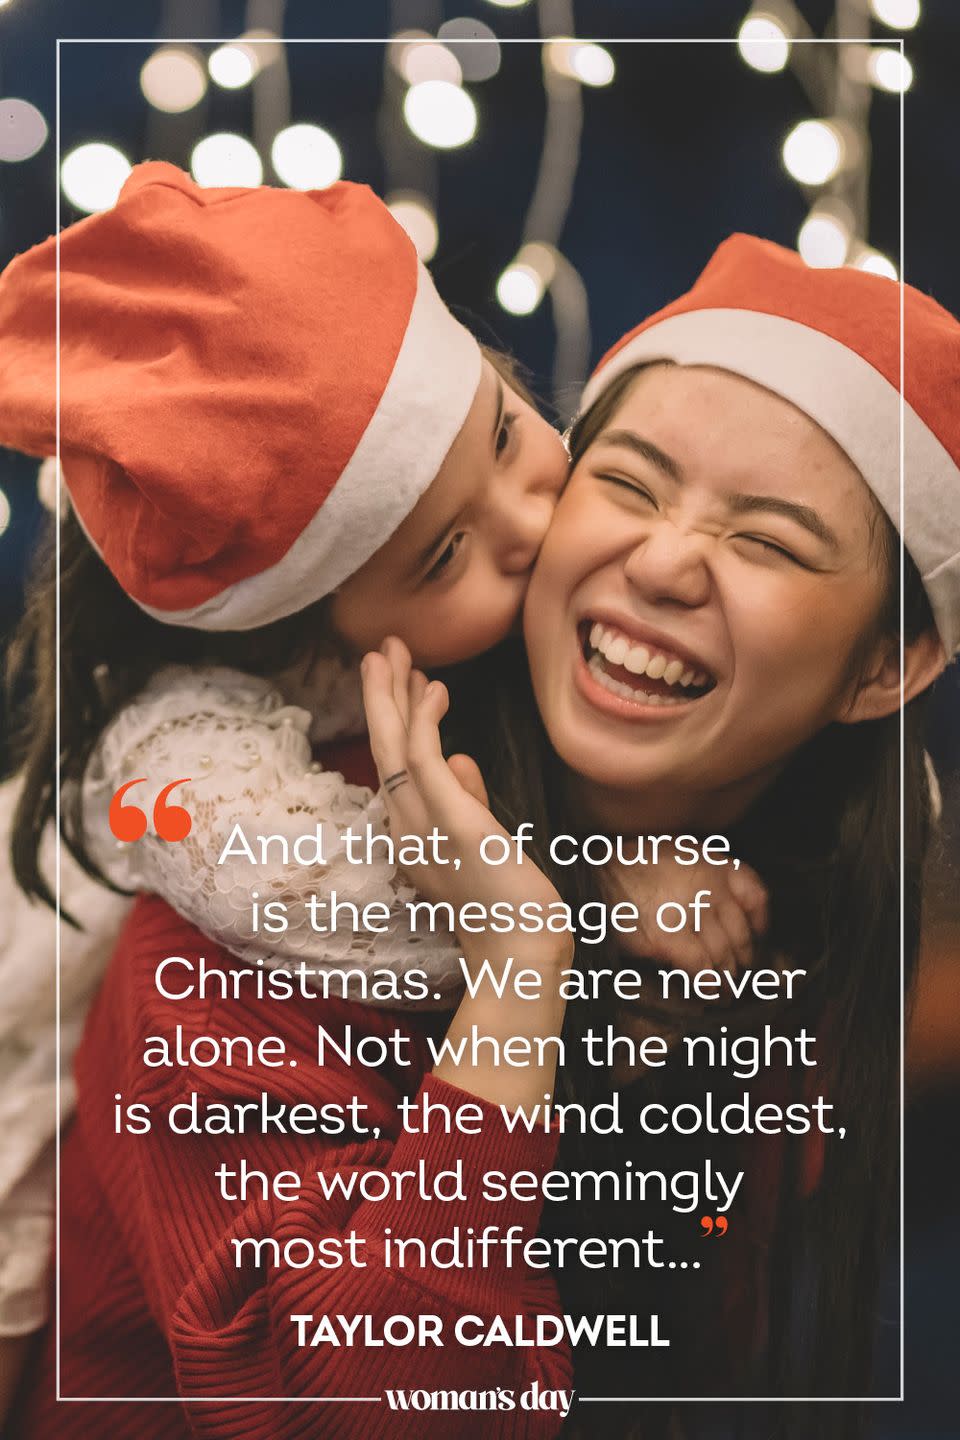 <p>"And that, of course, is the message of Christmas. We are never alone. Not when the night is darkest, the wind coldest, the world seemingly most indifferent…” — Taylor Caldwell</p>